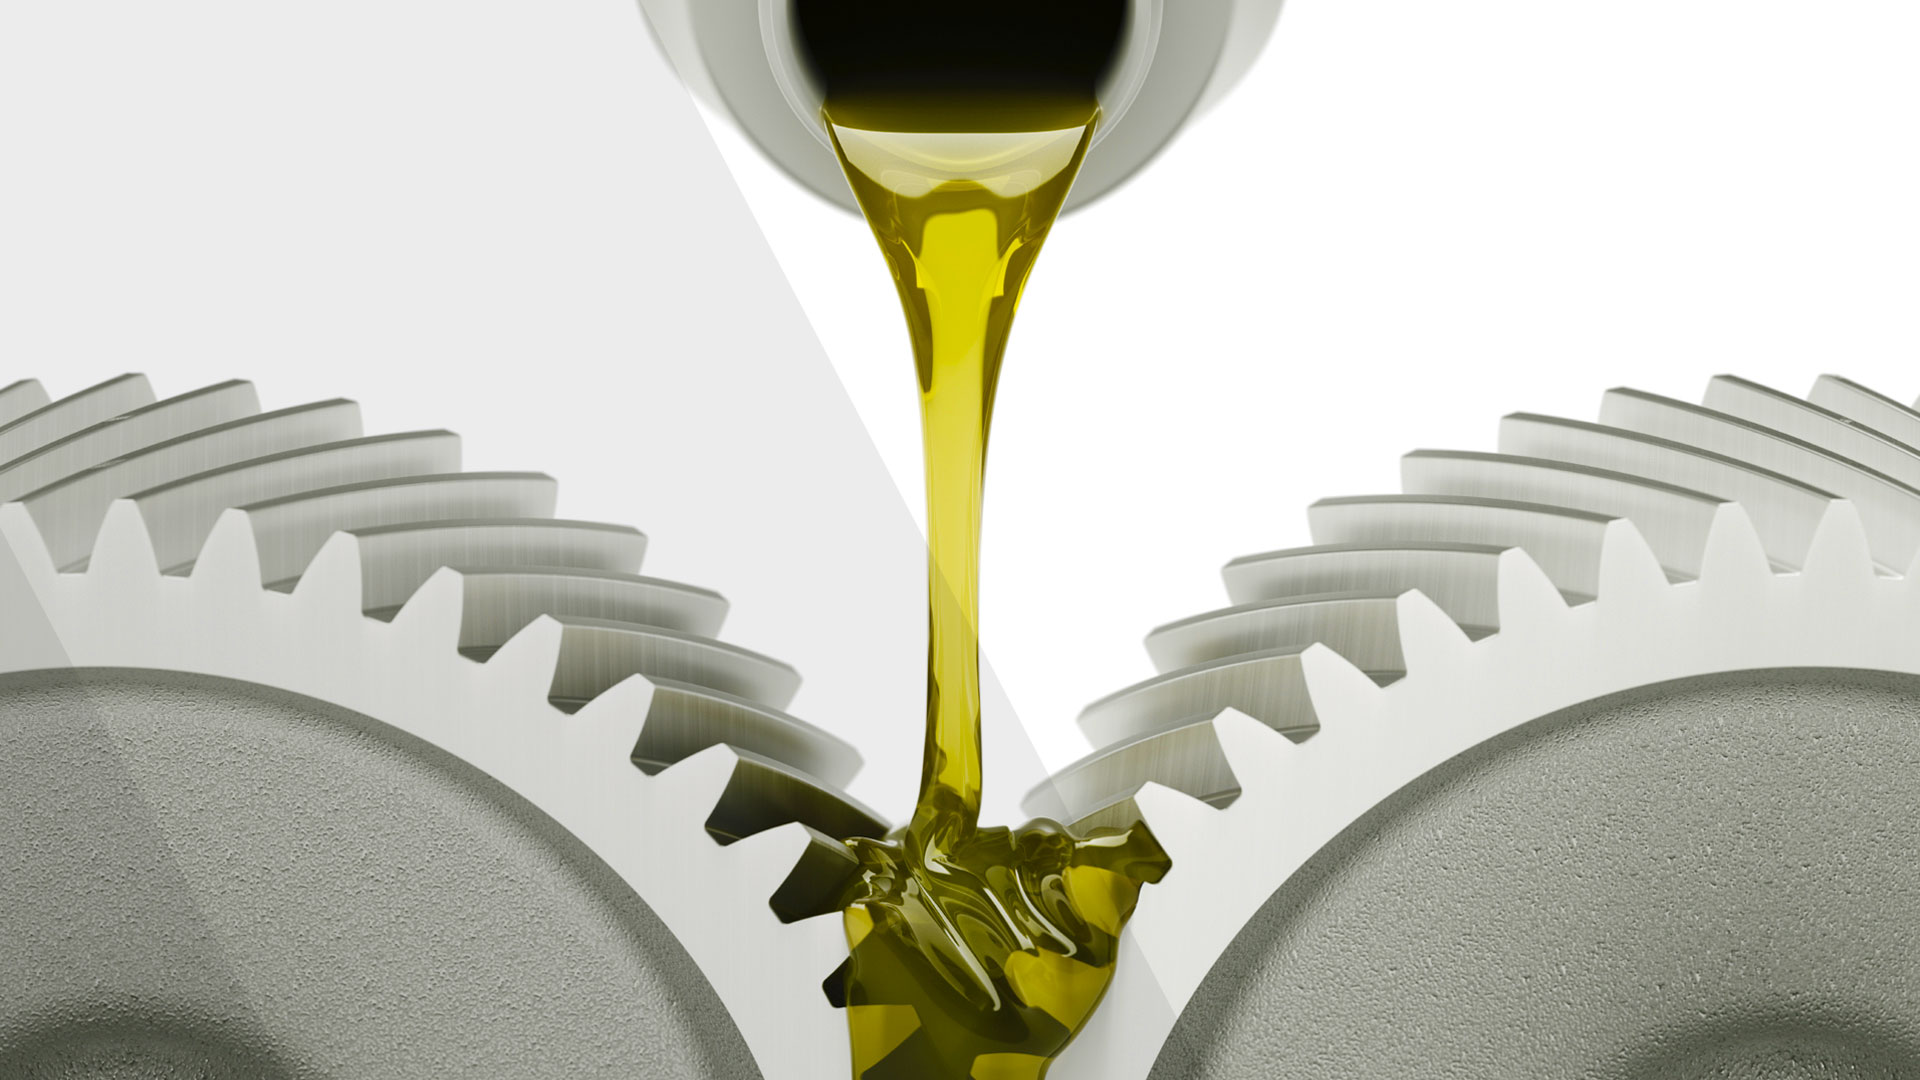 OILS & GREASES